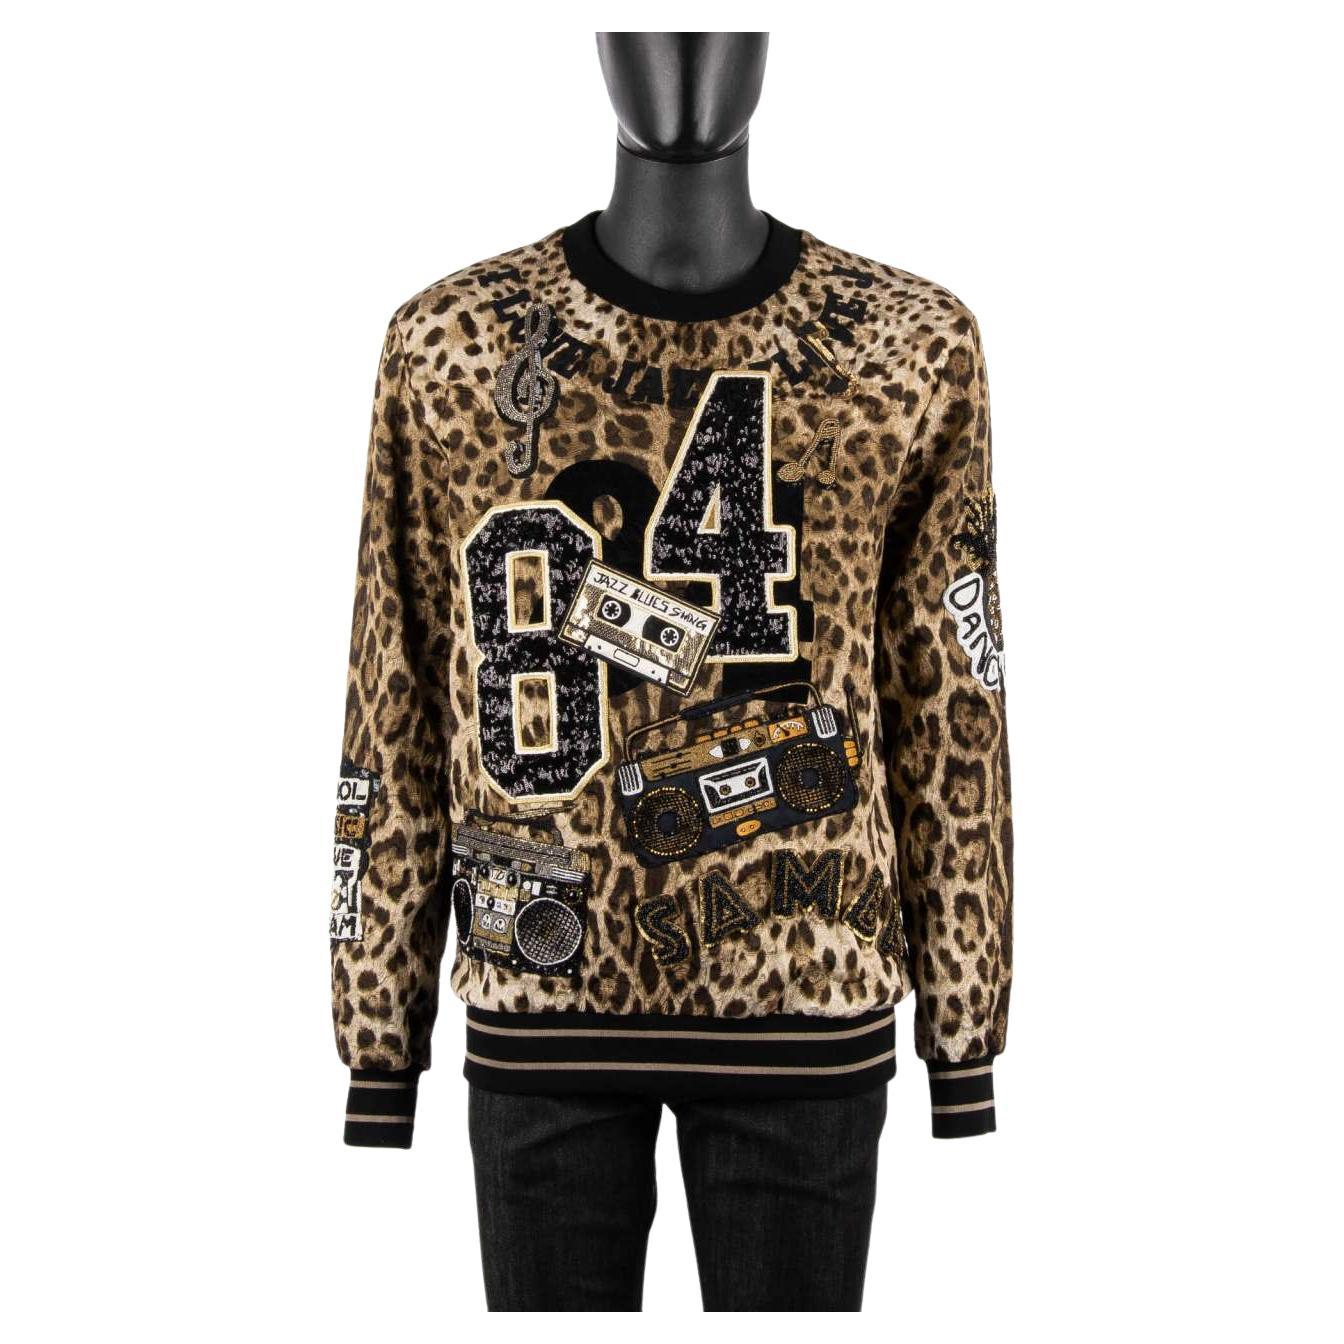 D&G Leopard Printed Sweater with Jazz Samba Music Embroidery Black Brown 48 For Sale